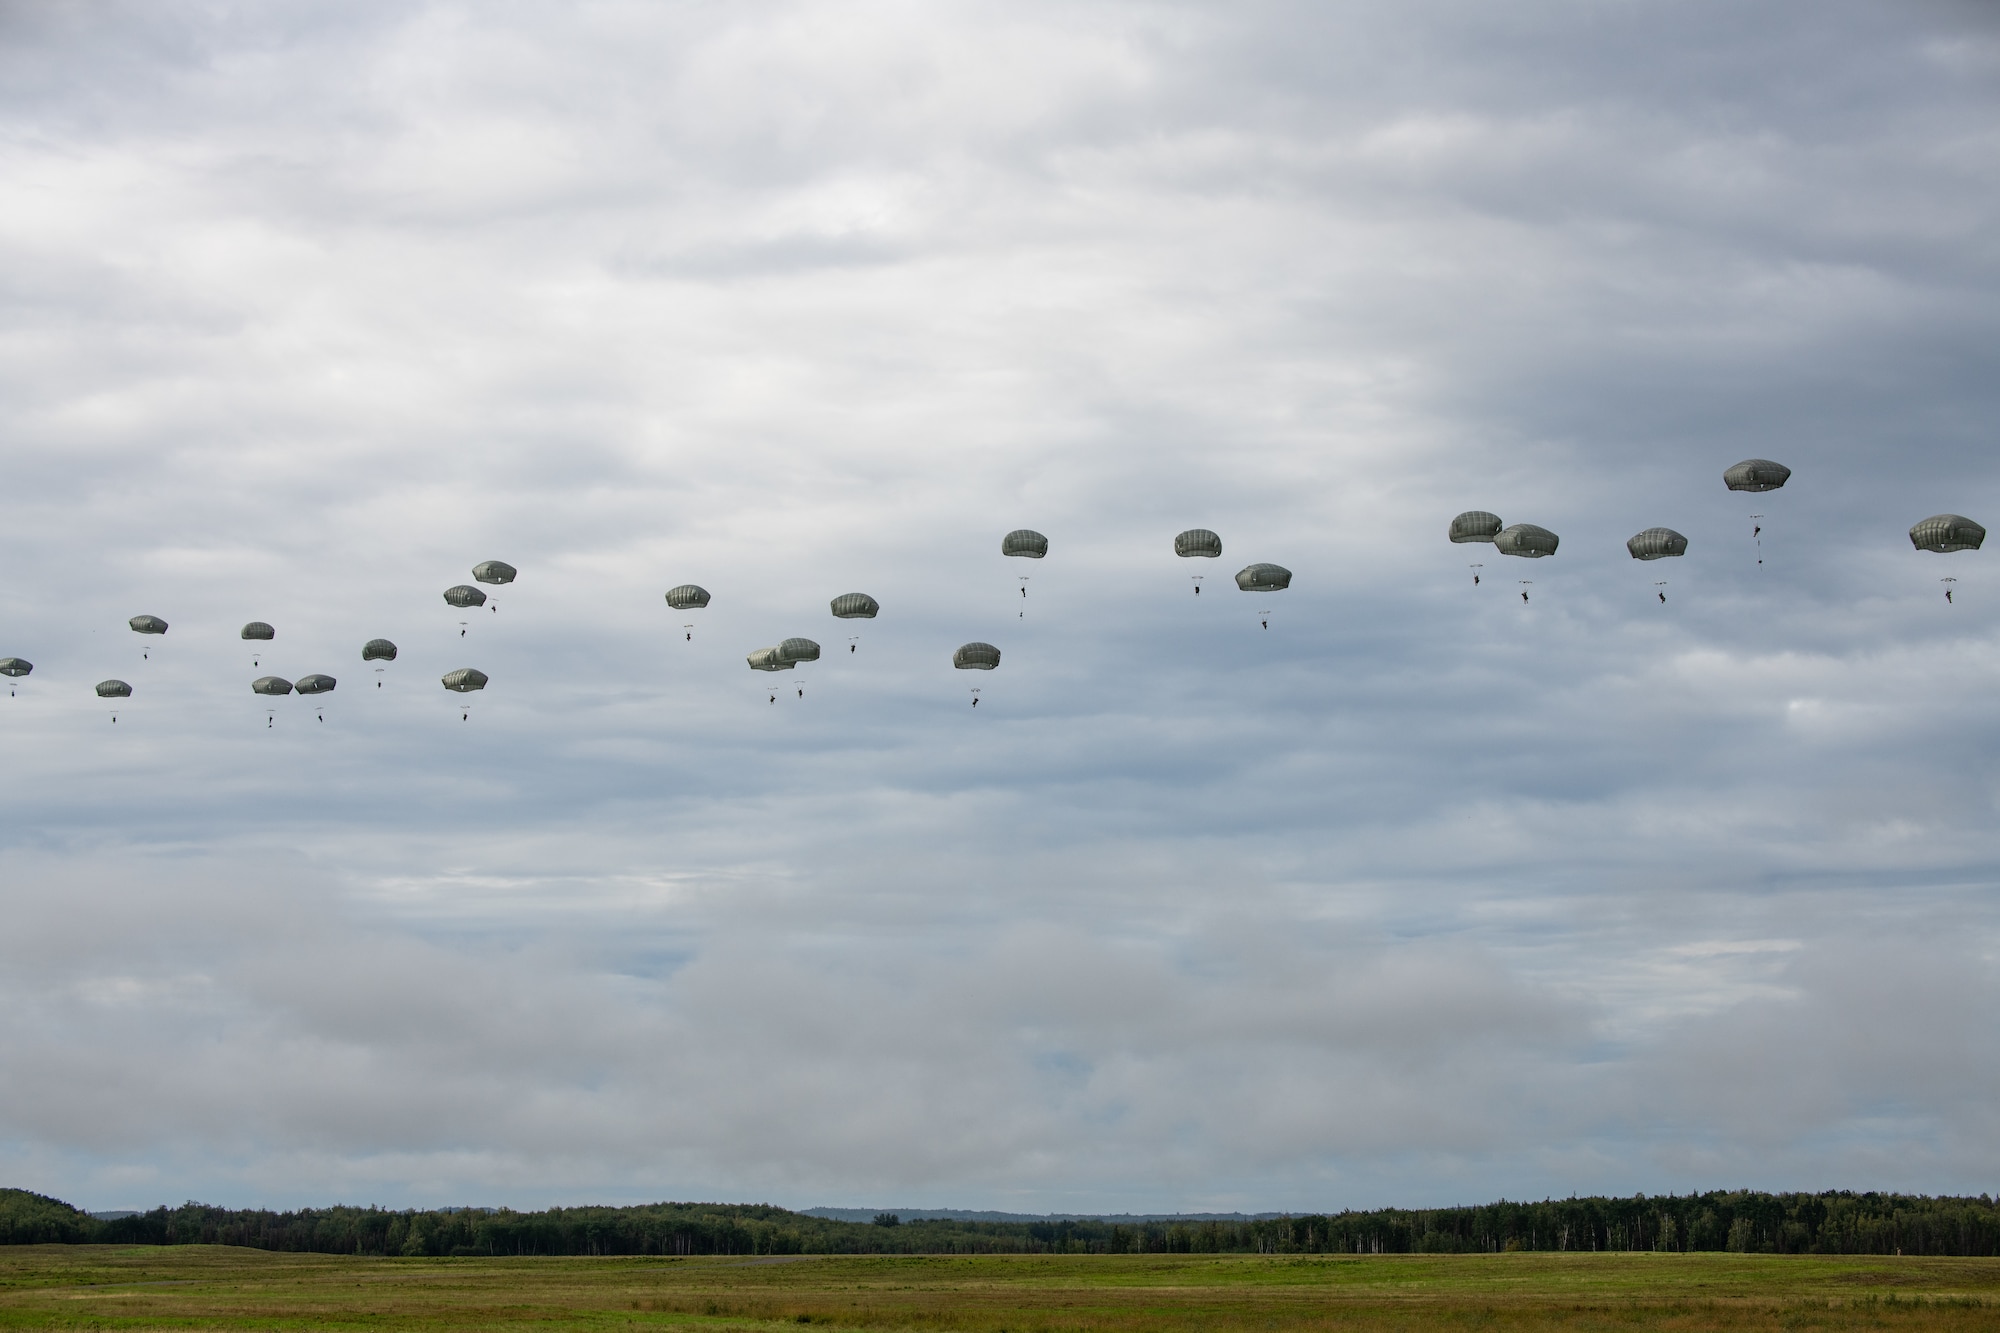 Paratroopers descend with parachutes after airborne operations.